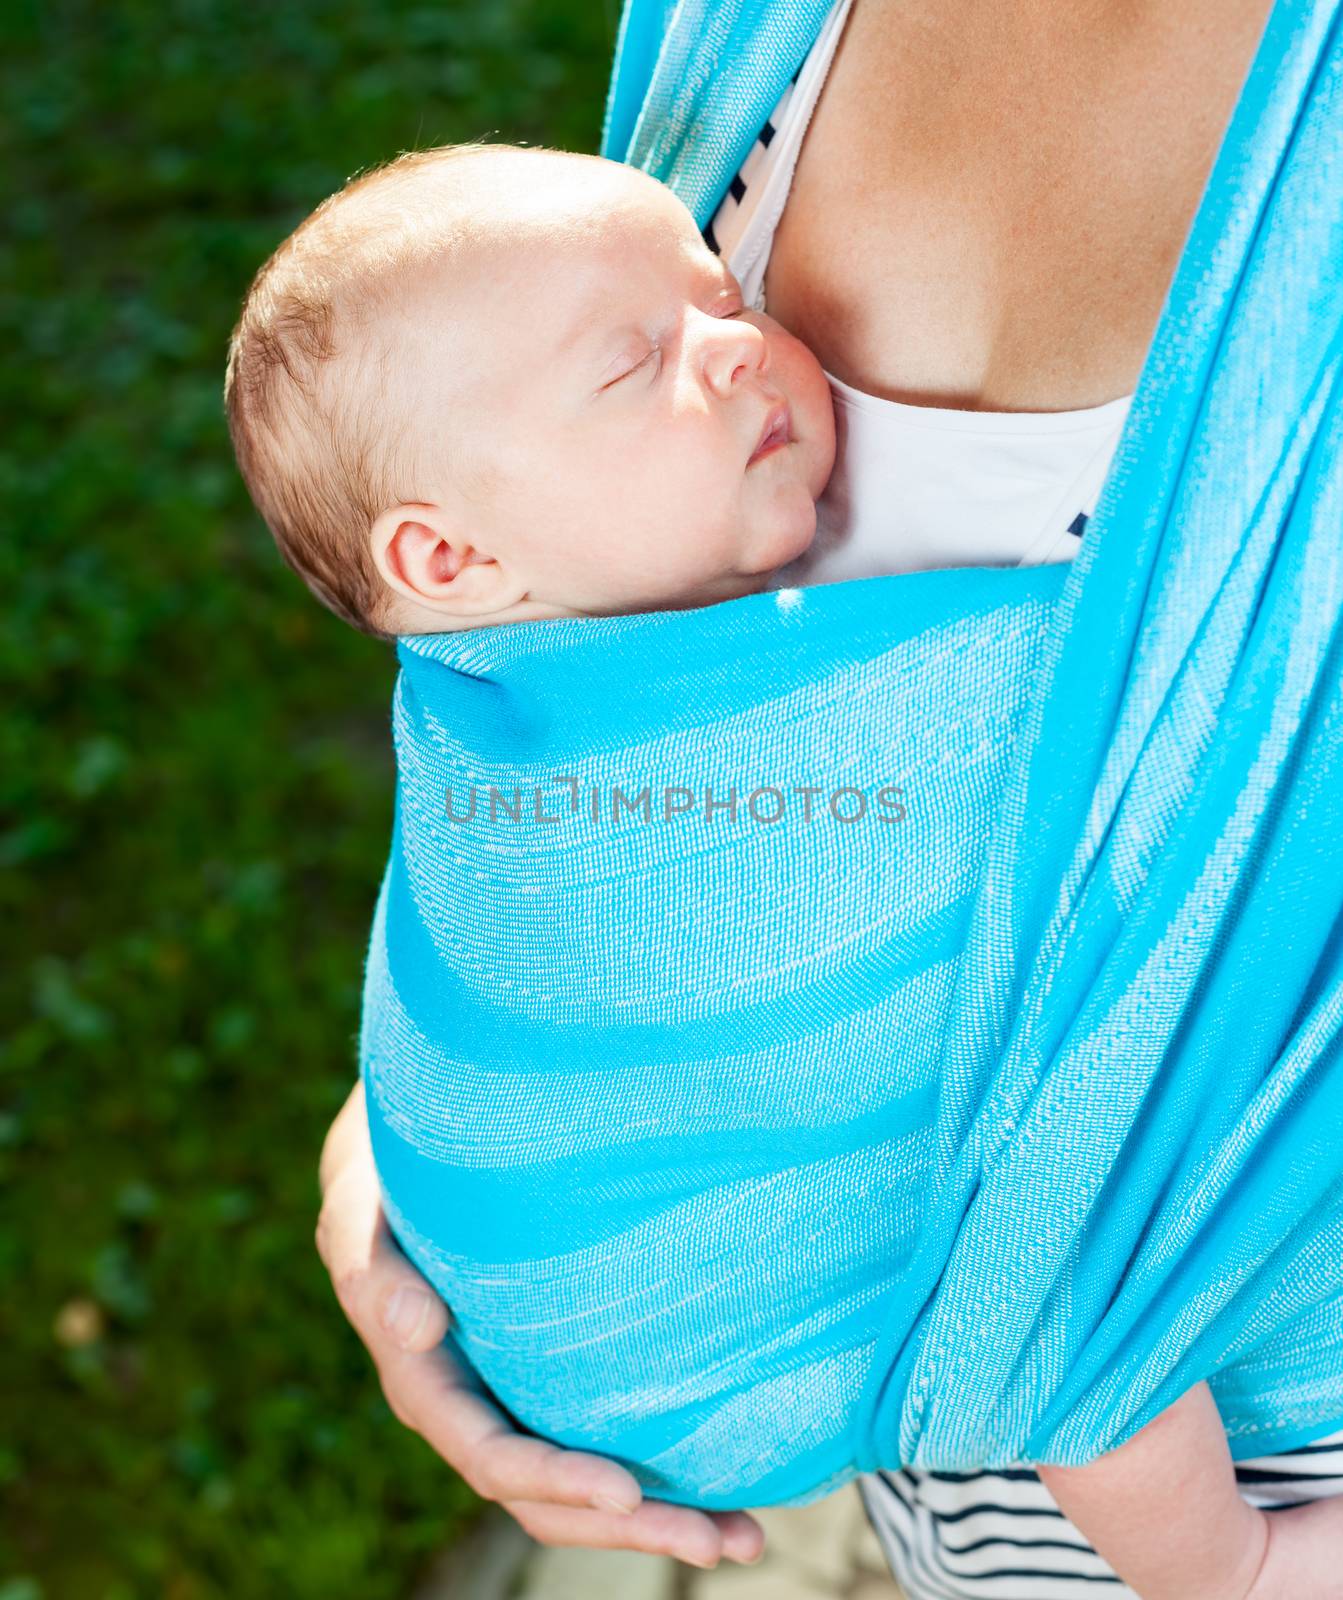 Mother carrying her child in a baby sling